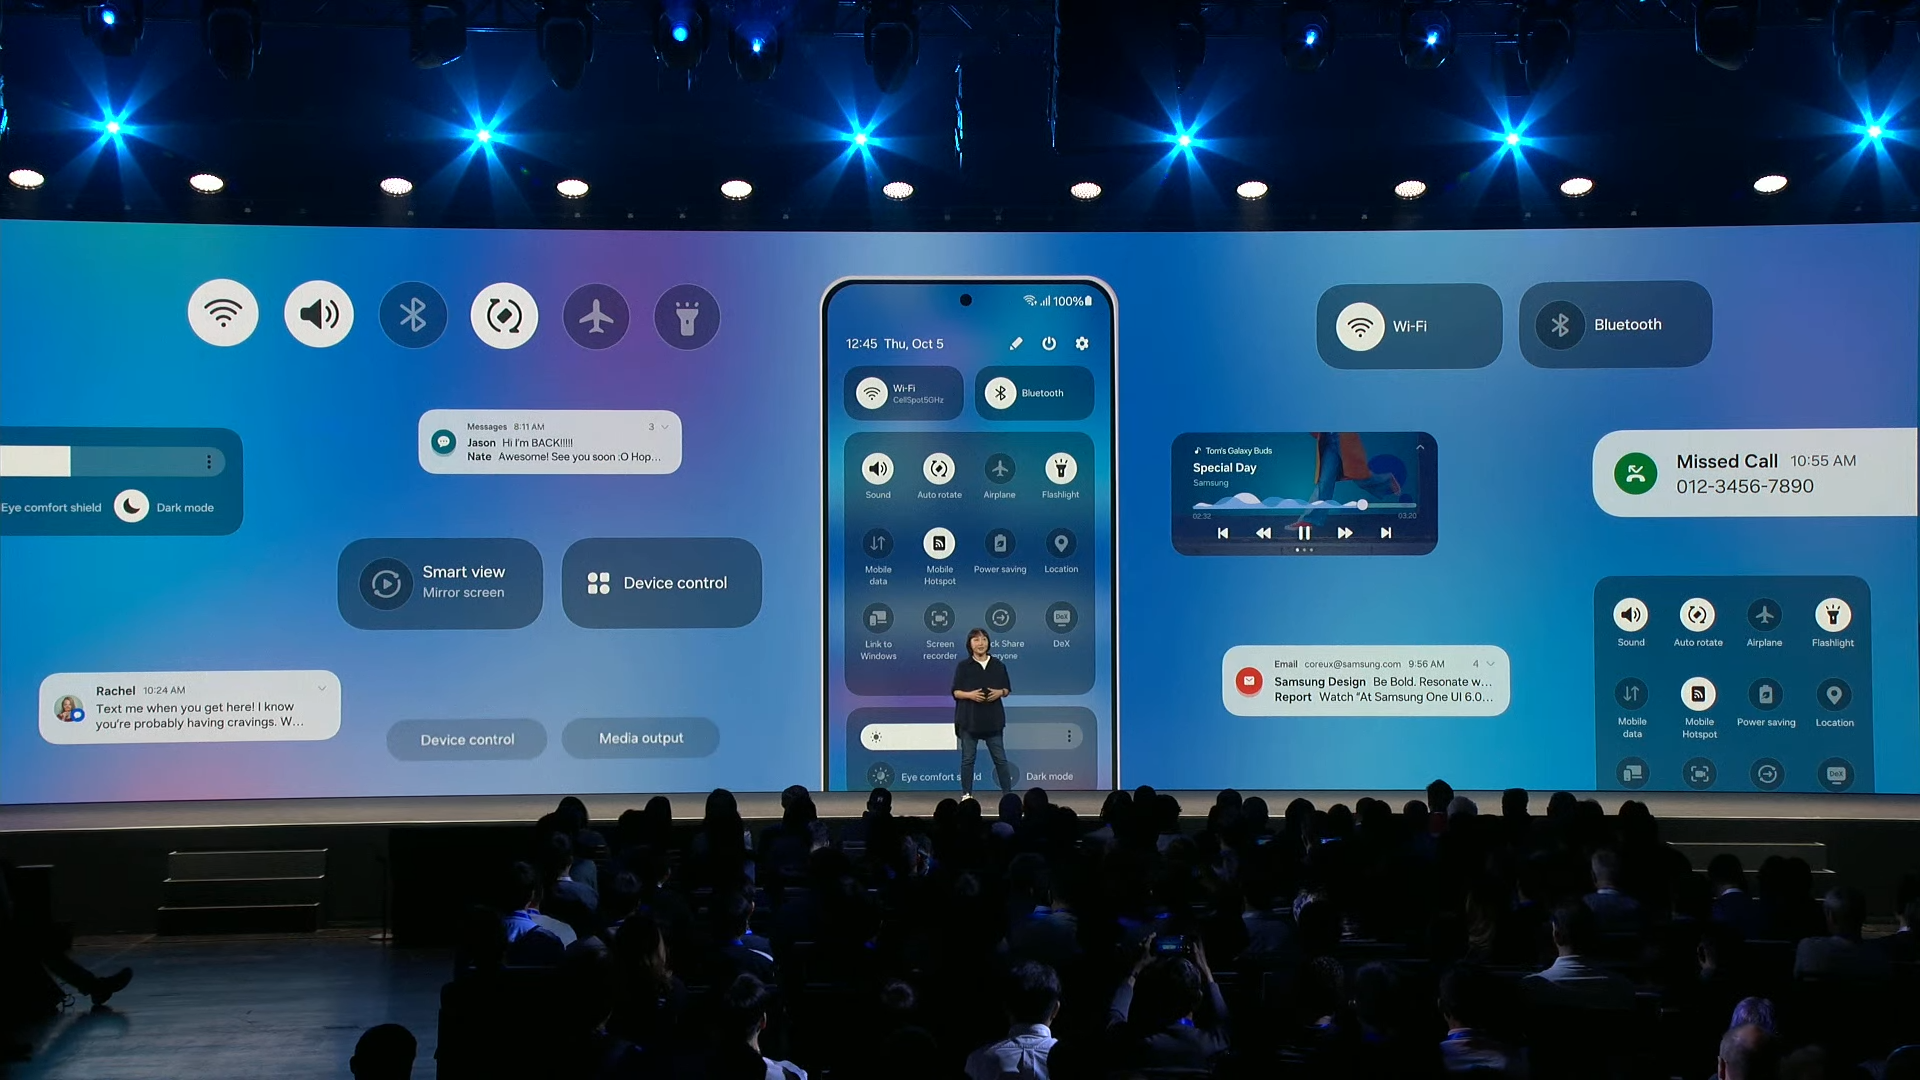 Samsung One UI 6 Features (10)